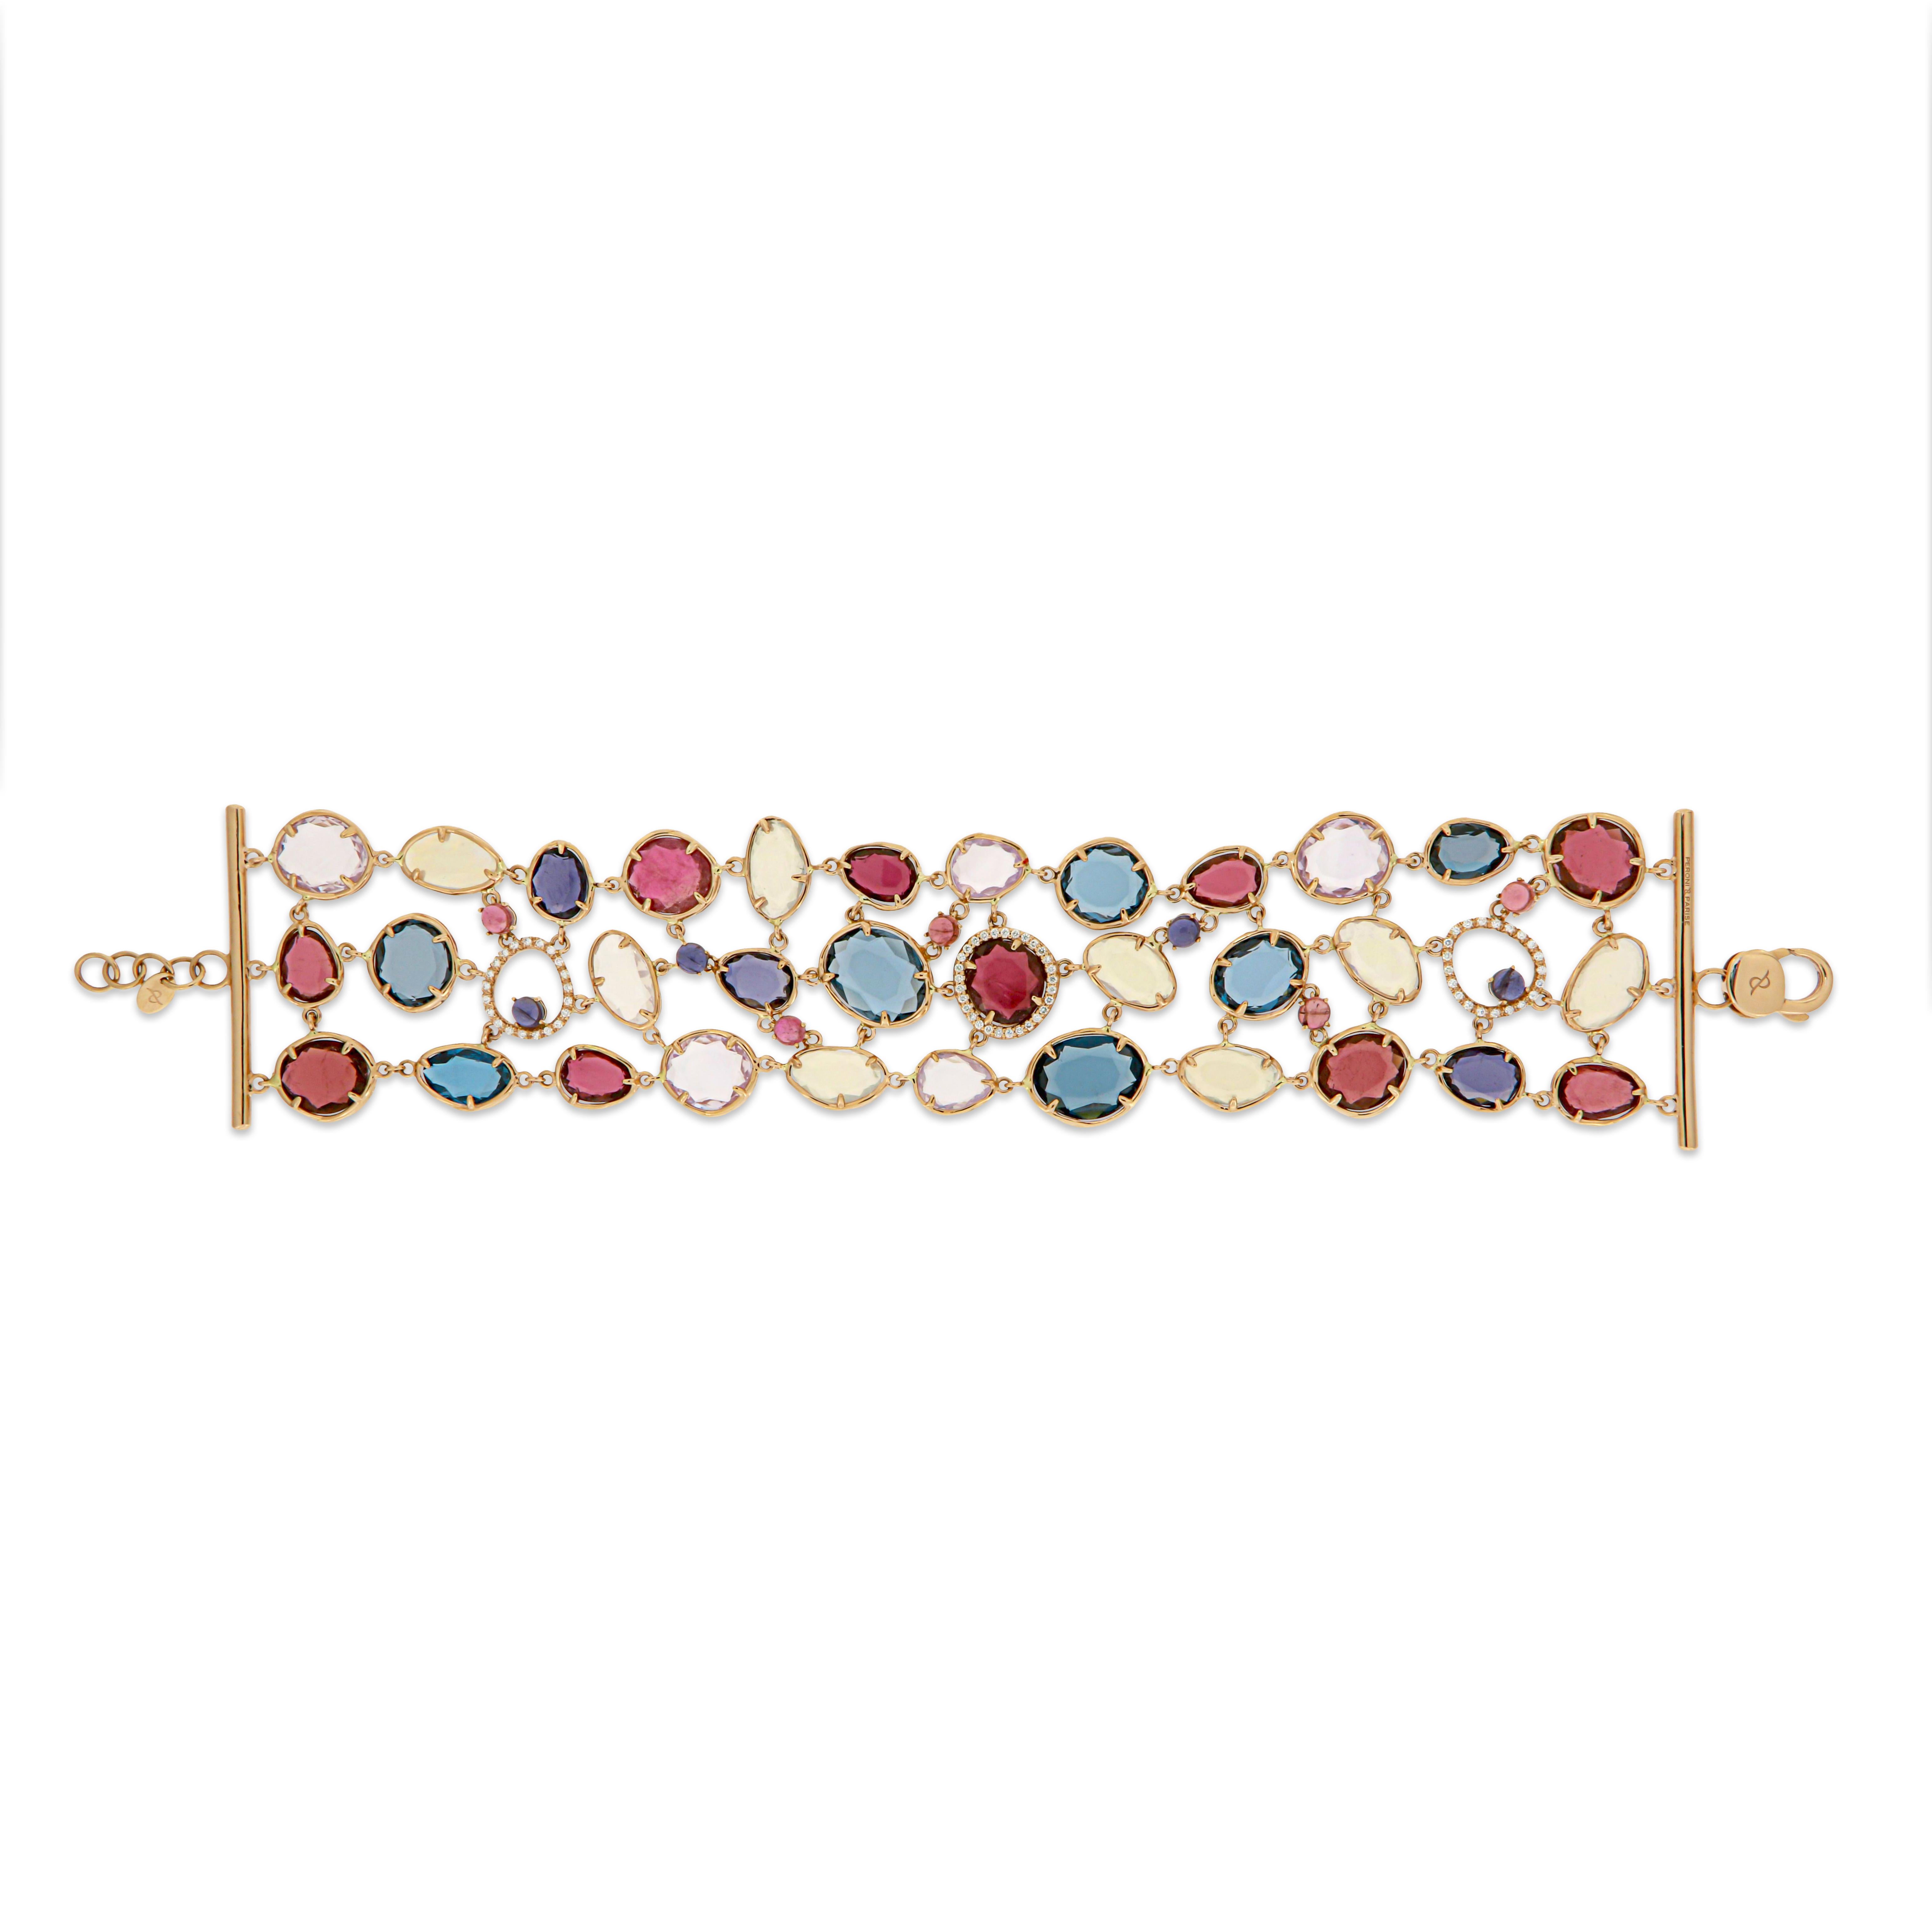 Bracelet Rose 18K Gold 
London blue topaz
Opal
Diamond 0,99 ct
Sunflower Quartz, Lilac Quartz 
Pink Tourmaline

Size 21
Weight 45.8

It is our honour to create fine jewelry, and it’s for that reason that we choose to only work with high-quality,